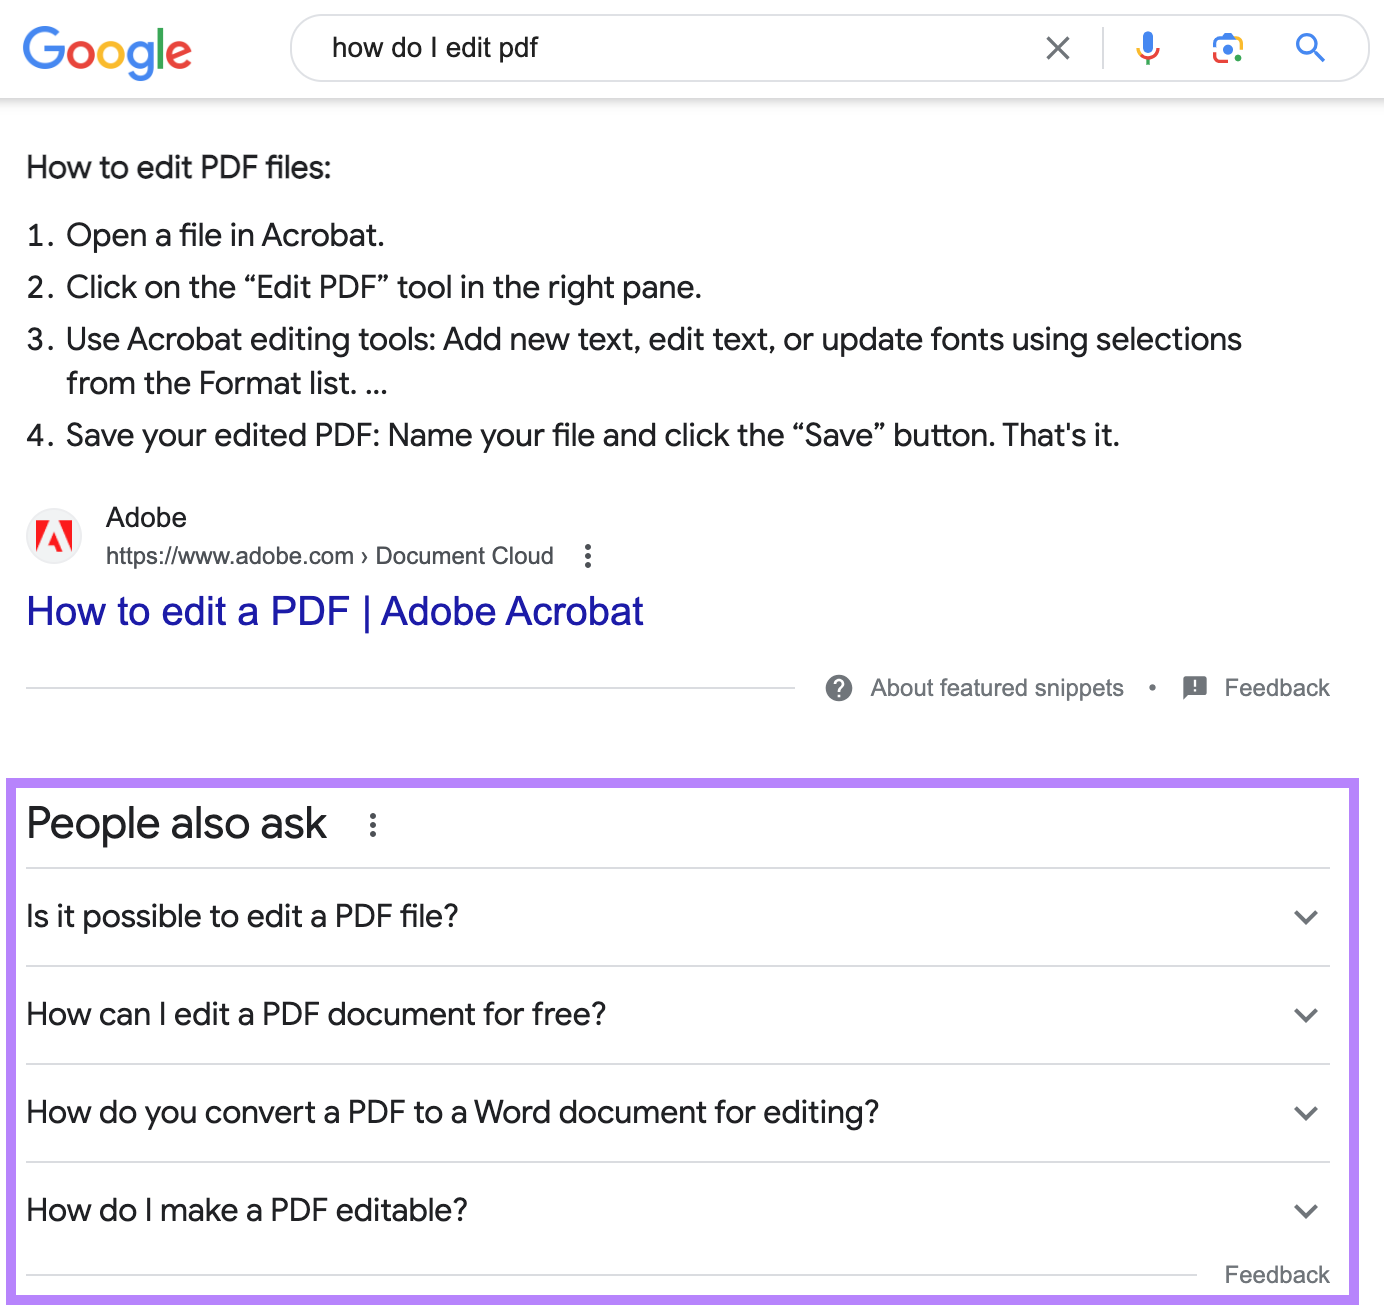 an example of "People also ask" block in Google SERP for "how do i edit pdf"